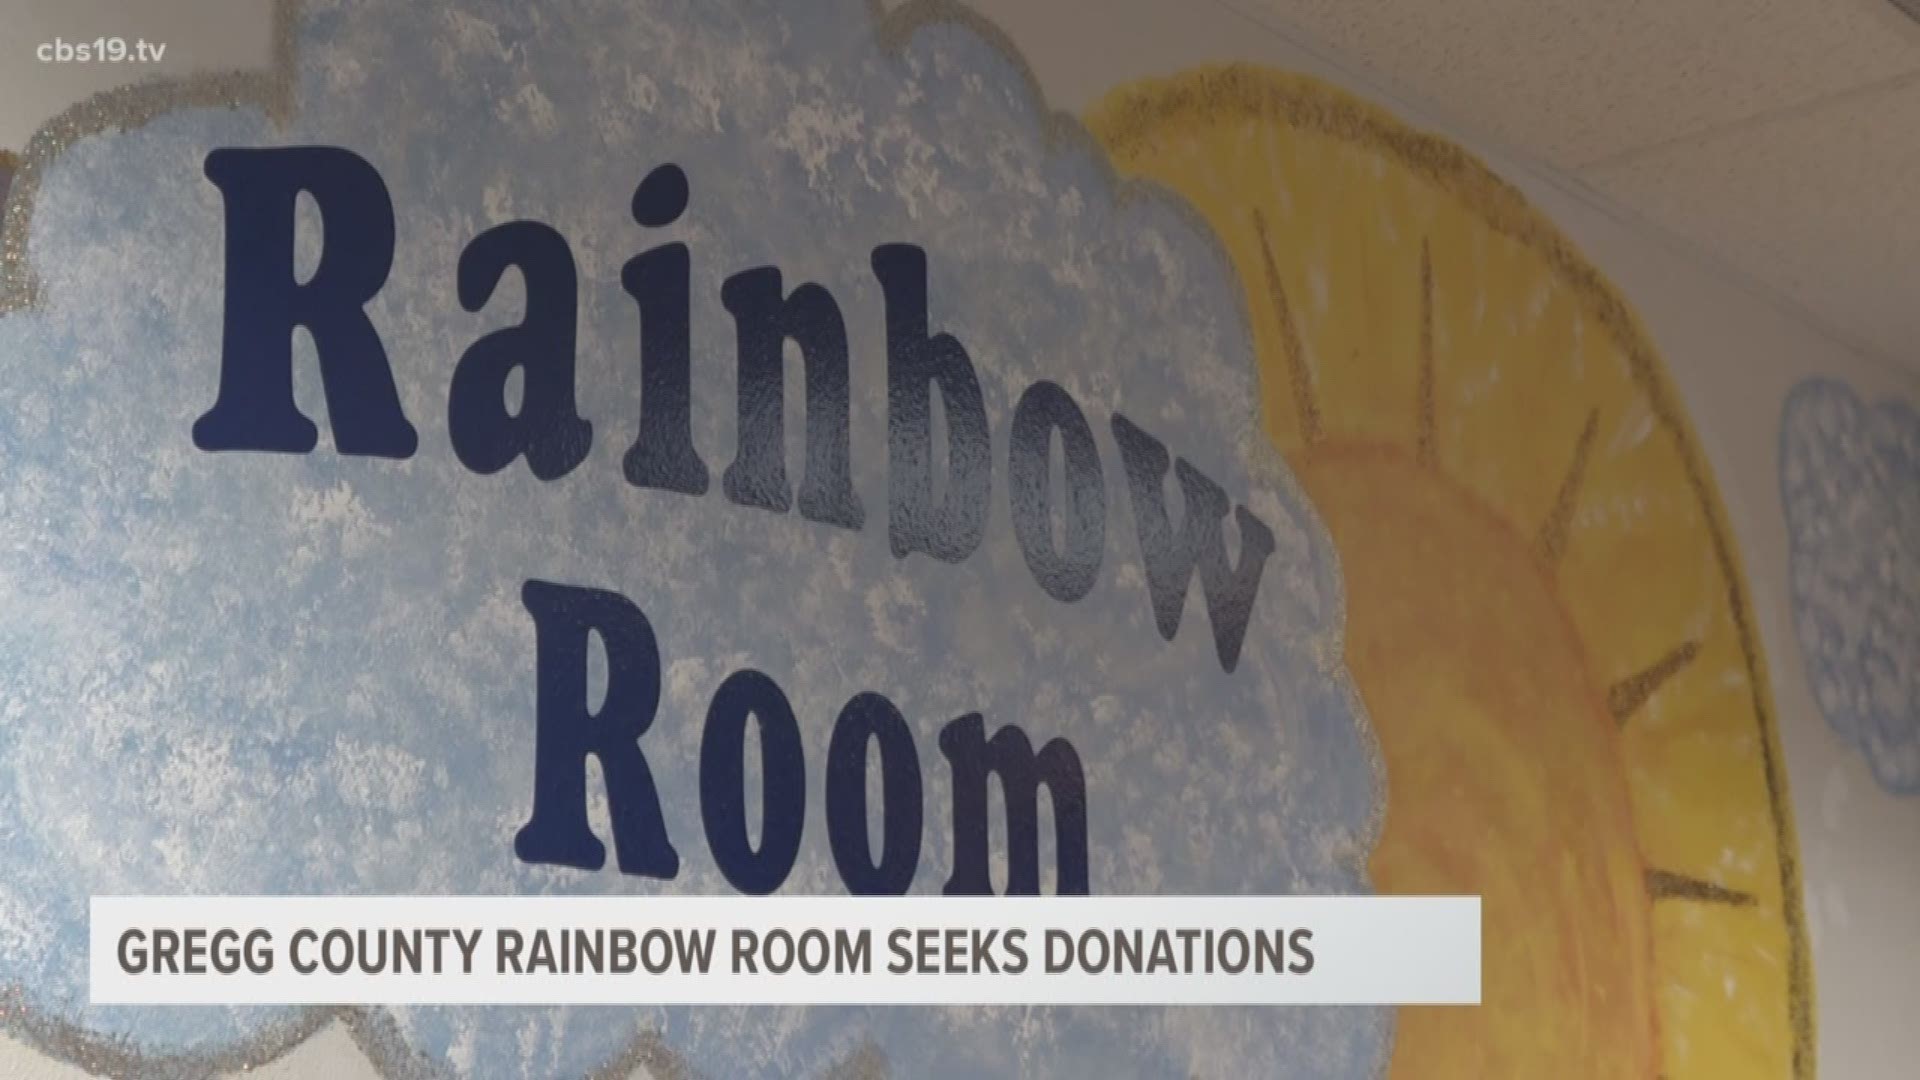 In the Rainbow Room, CPS caseworkers can get supplies for children who are victims of abuse or neglect - clothing, school supplies, diapers, and more.